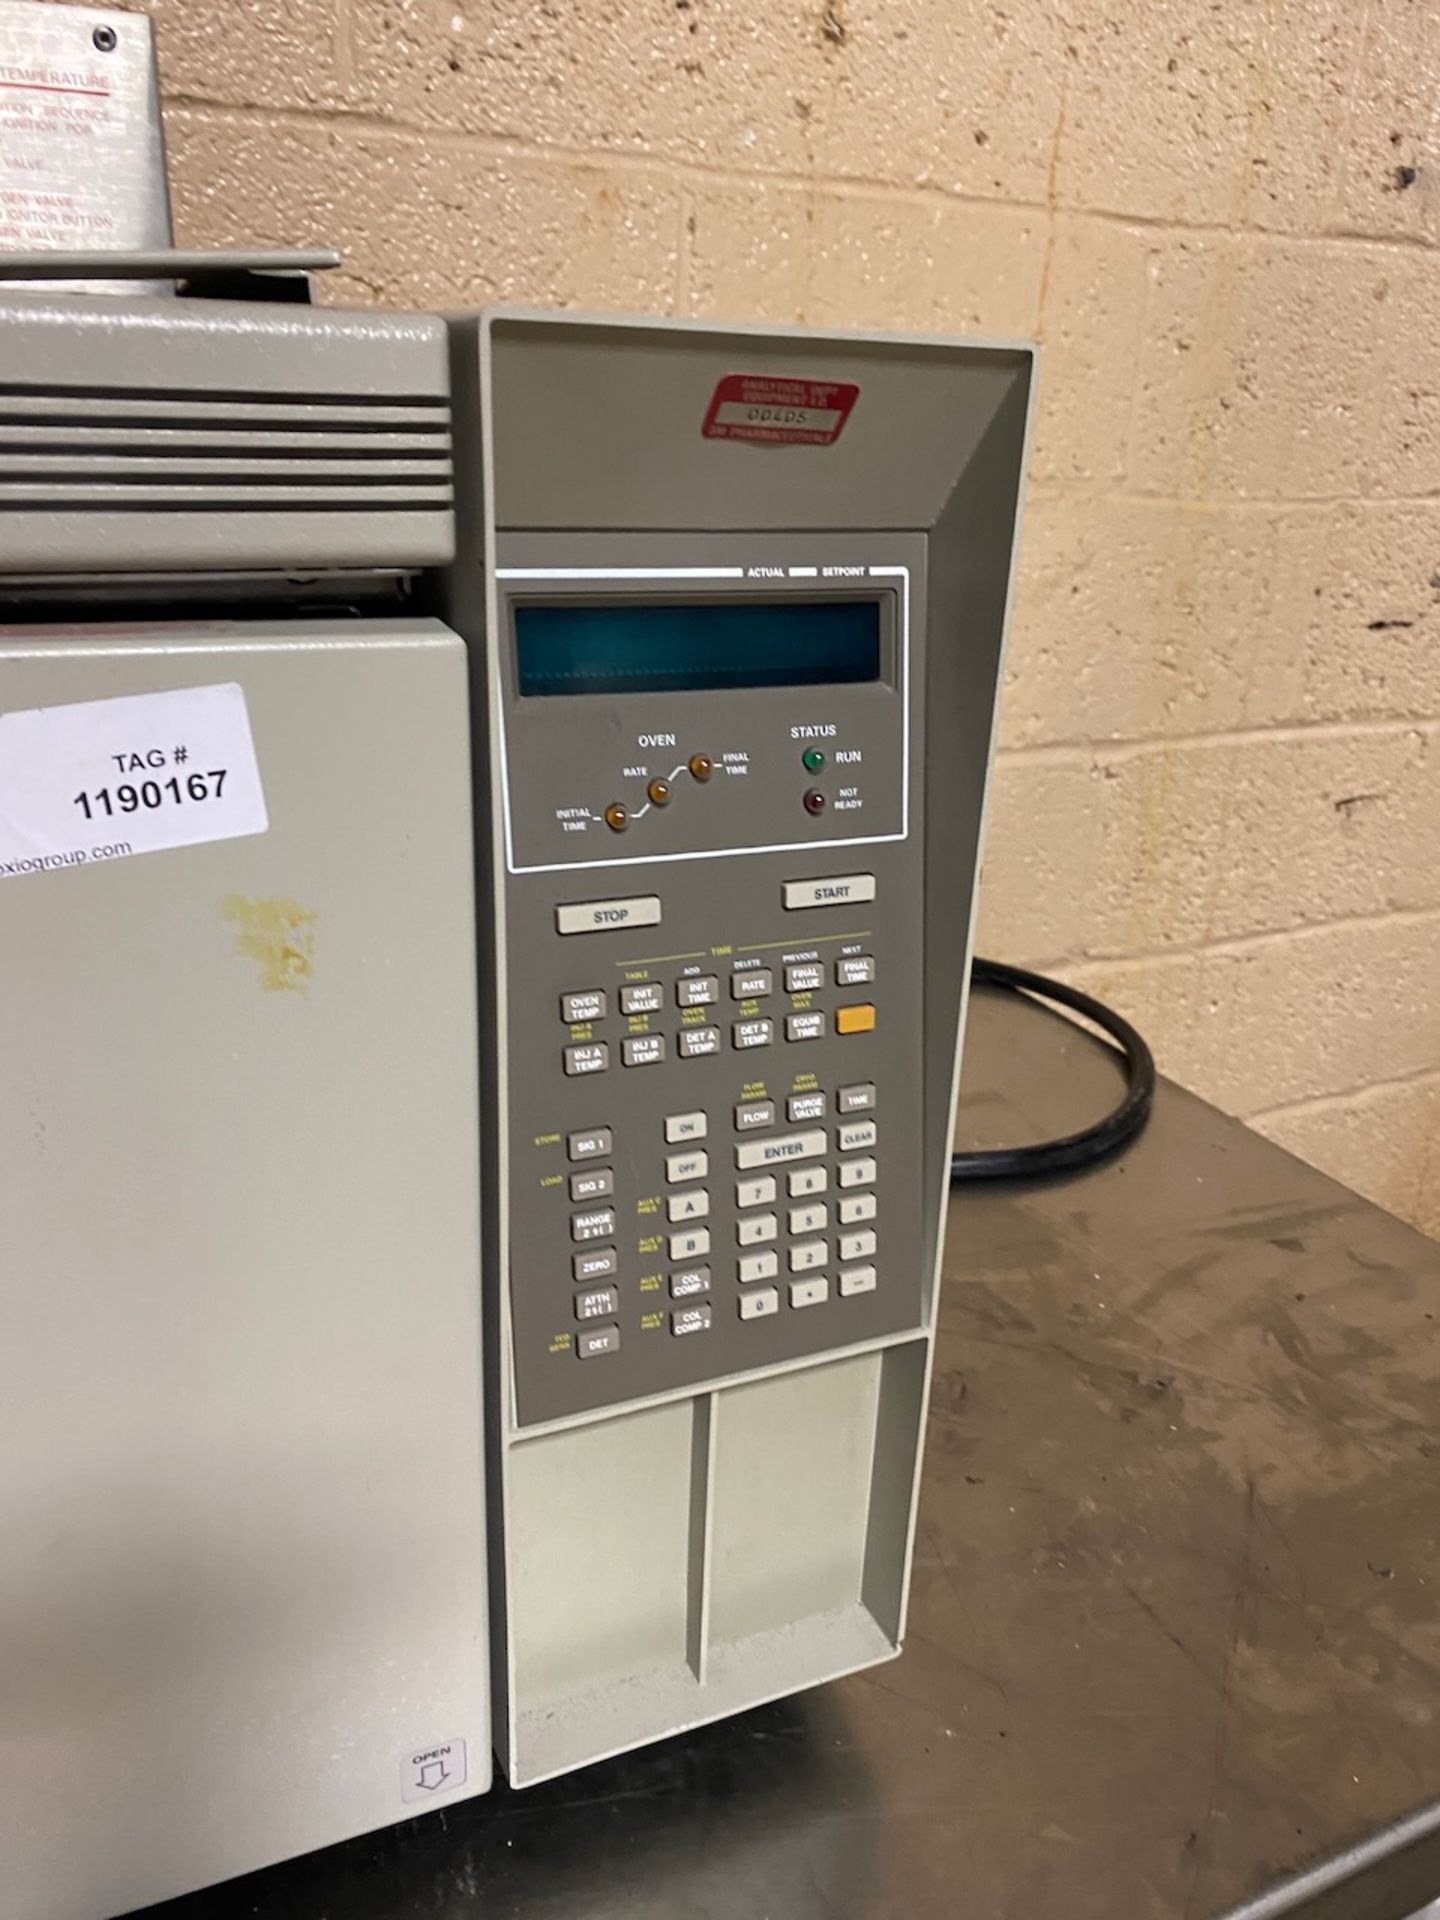 Hewlett Packard 5890 Series 2 Plus Gas chromatograph. {TAG:1190167} - Image 4 of 8